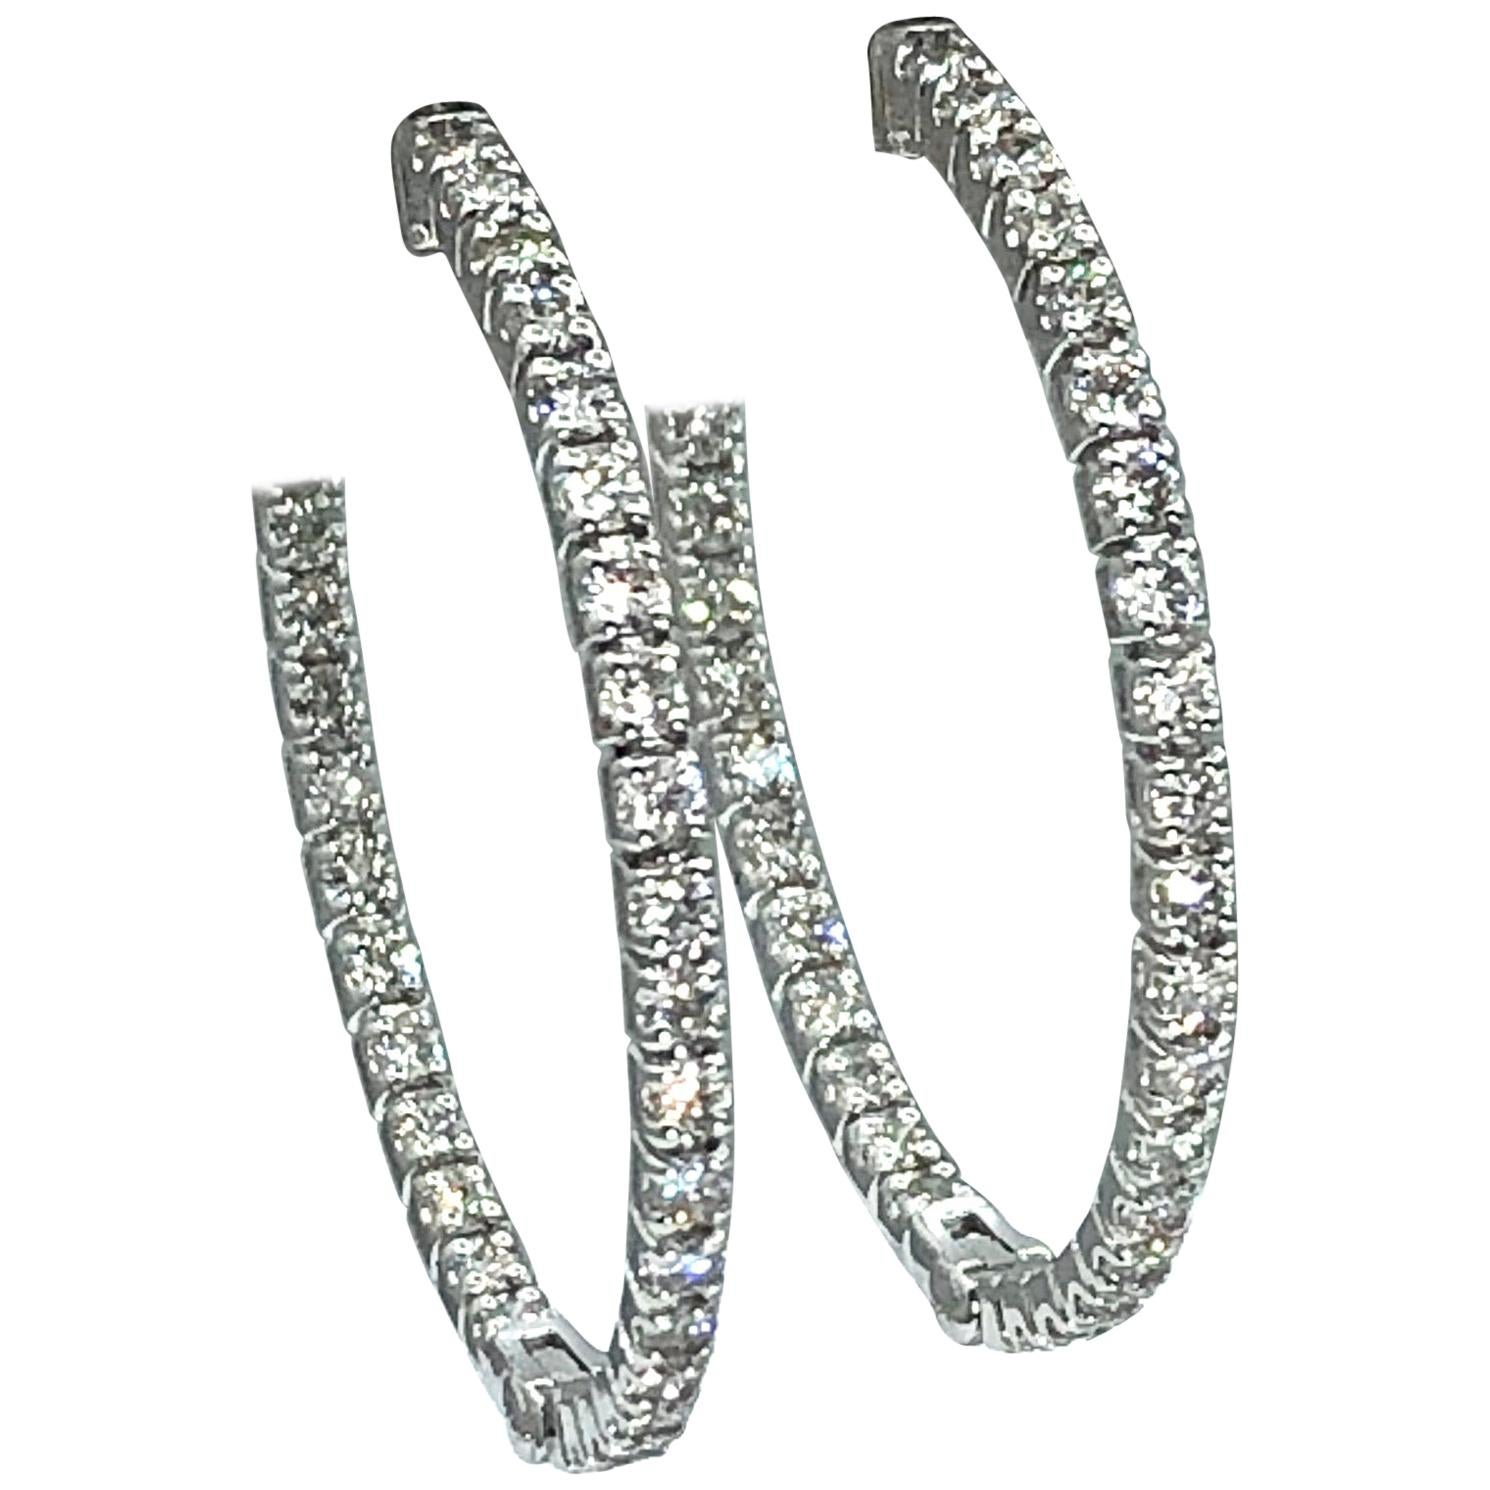 These gorgeous diamond hoops are set in 14kt white gold with 1.62ct. of GH color SI clarity diamonds.
If you don't see something, say something! We would be happy to work with you to create your dream hoops! 